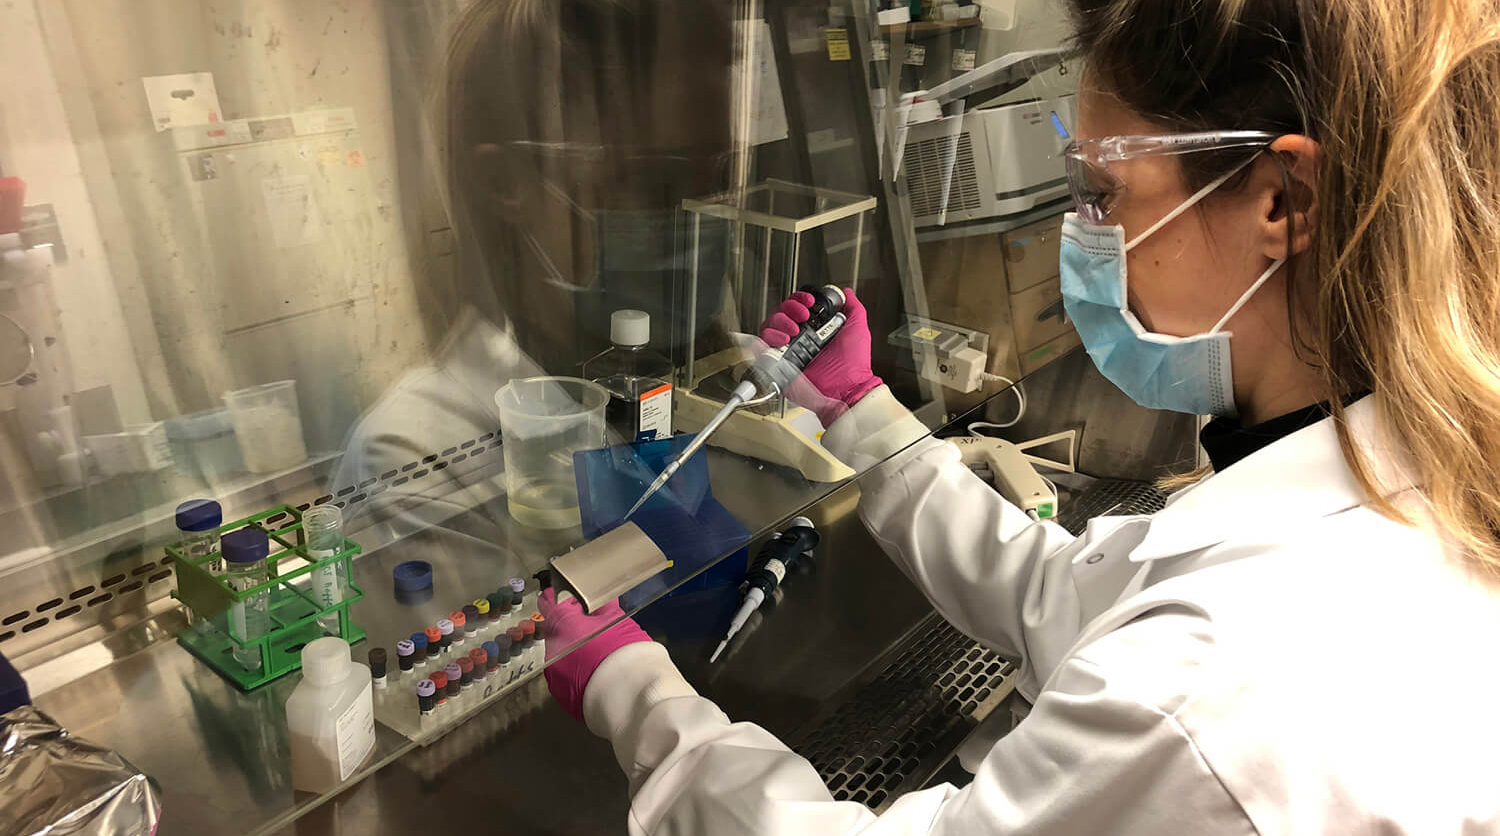 María Betina Pampena, a postdoctoral researcher in Michael Betts’s lab at the Perelman School of Medicine, works through the pandemic to identify patterns in patients’ immune responses to COVID-19. The work could lead to more tailored approaches to treatment. (Image: Leticia Kuri-Cervantes)